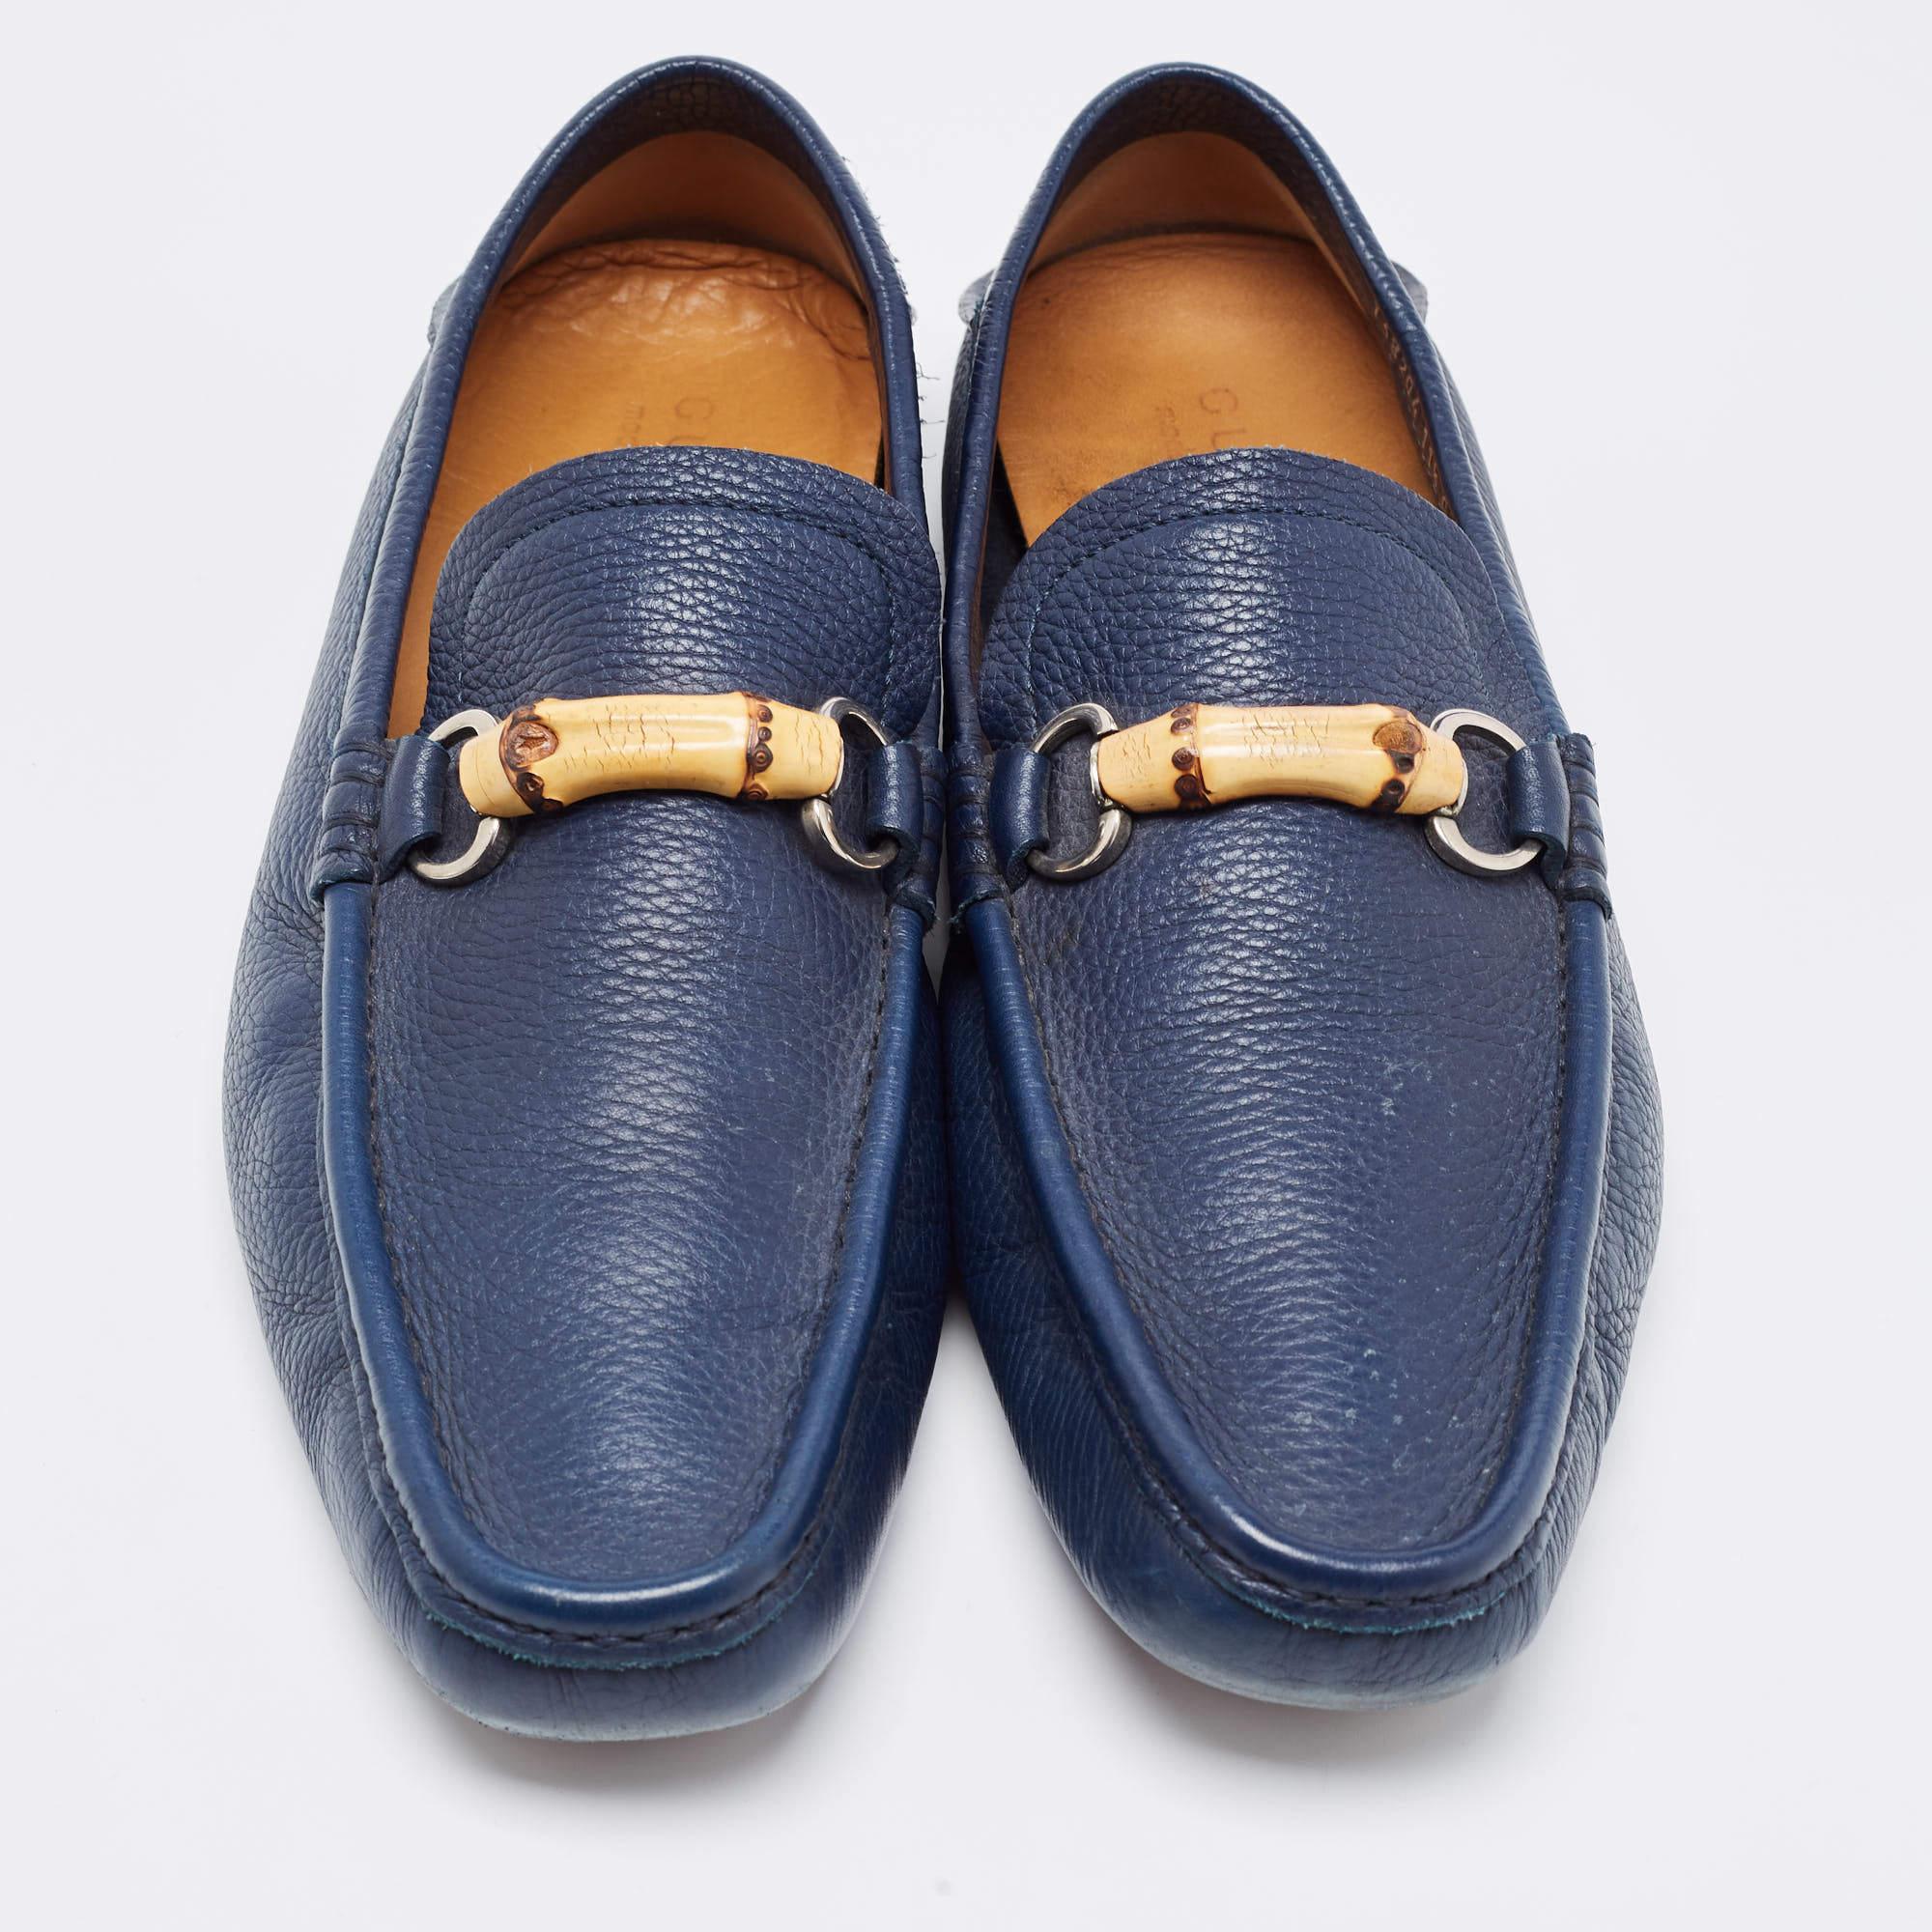 To perfectly complement your attires, we bring you this pair of loafers that speak nothing but style. The shoes have been crafted with skill and are designed to be easy to slip on. They are just the right choice to complement your fashionable side.

